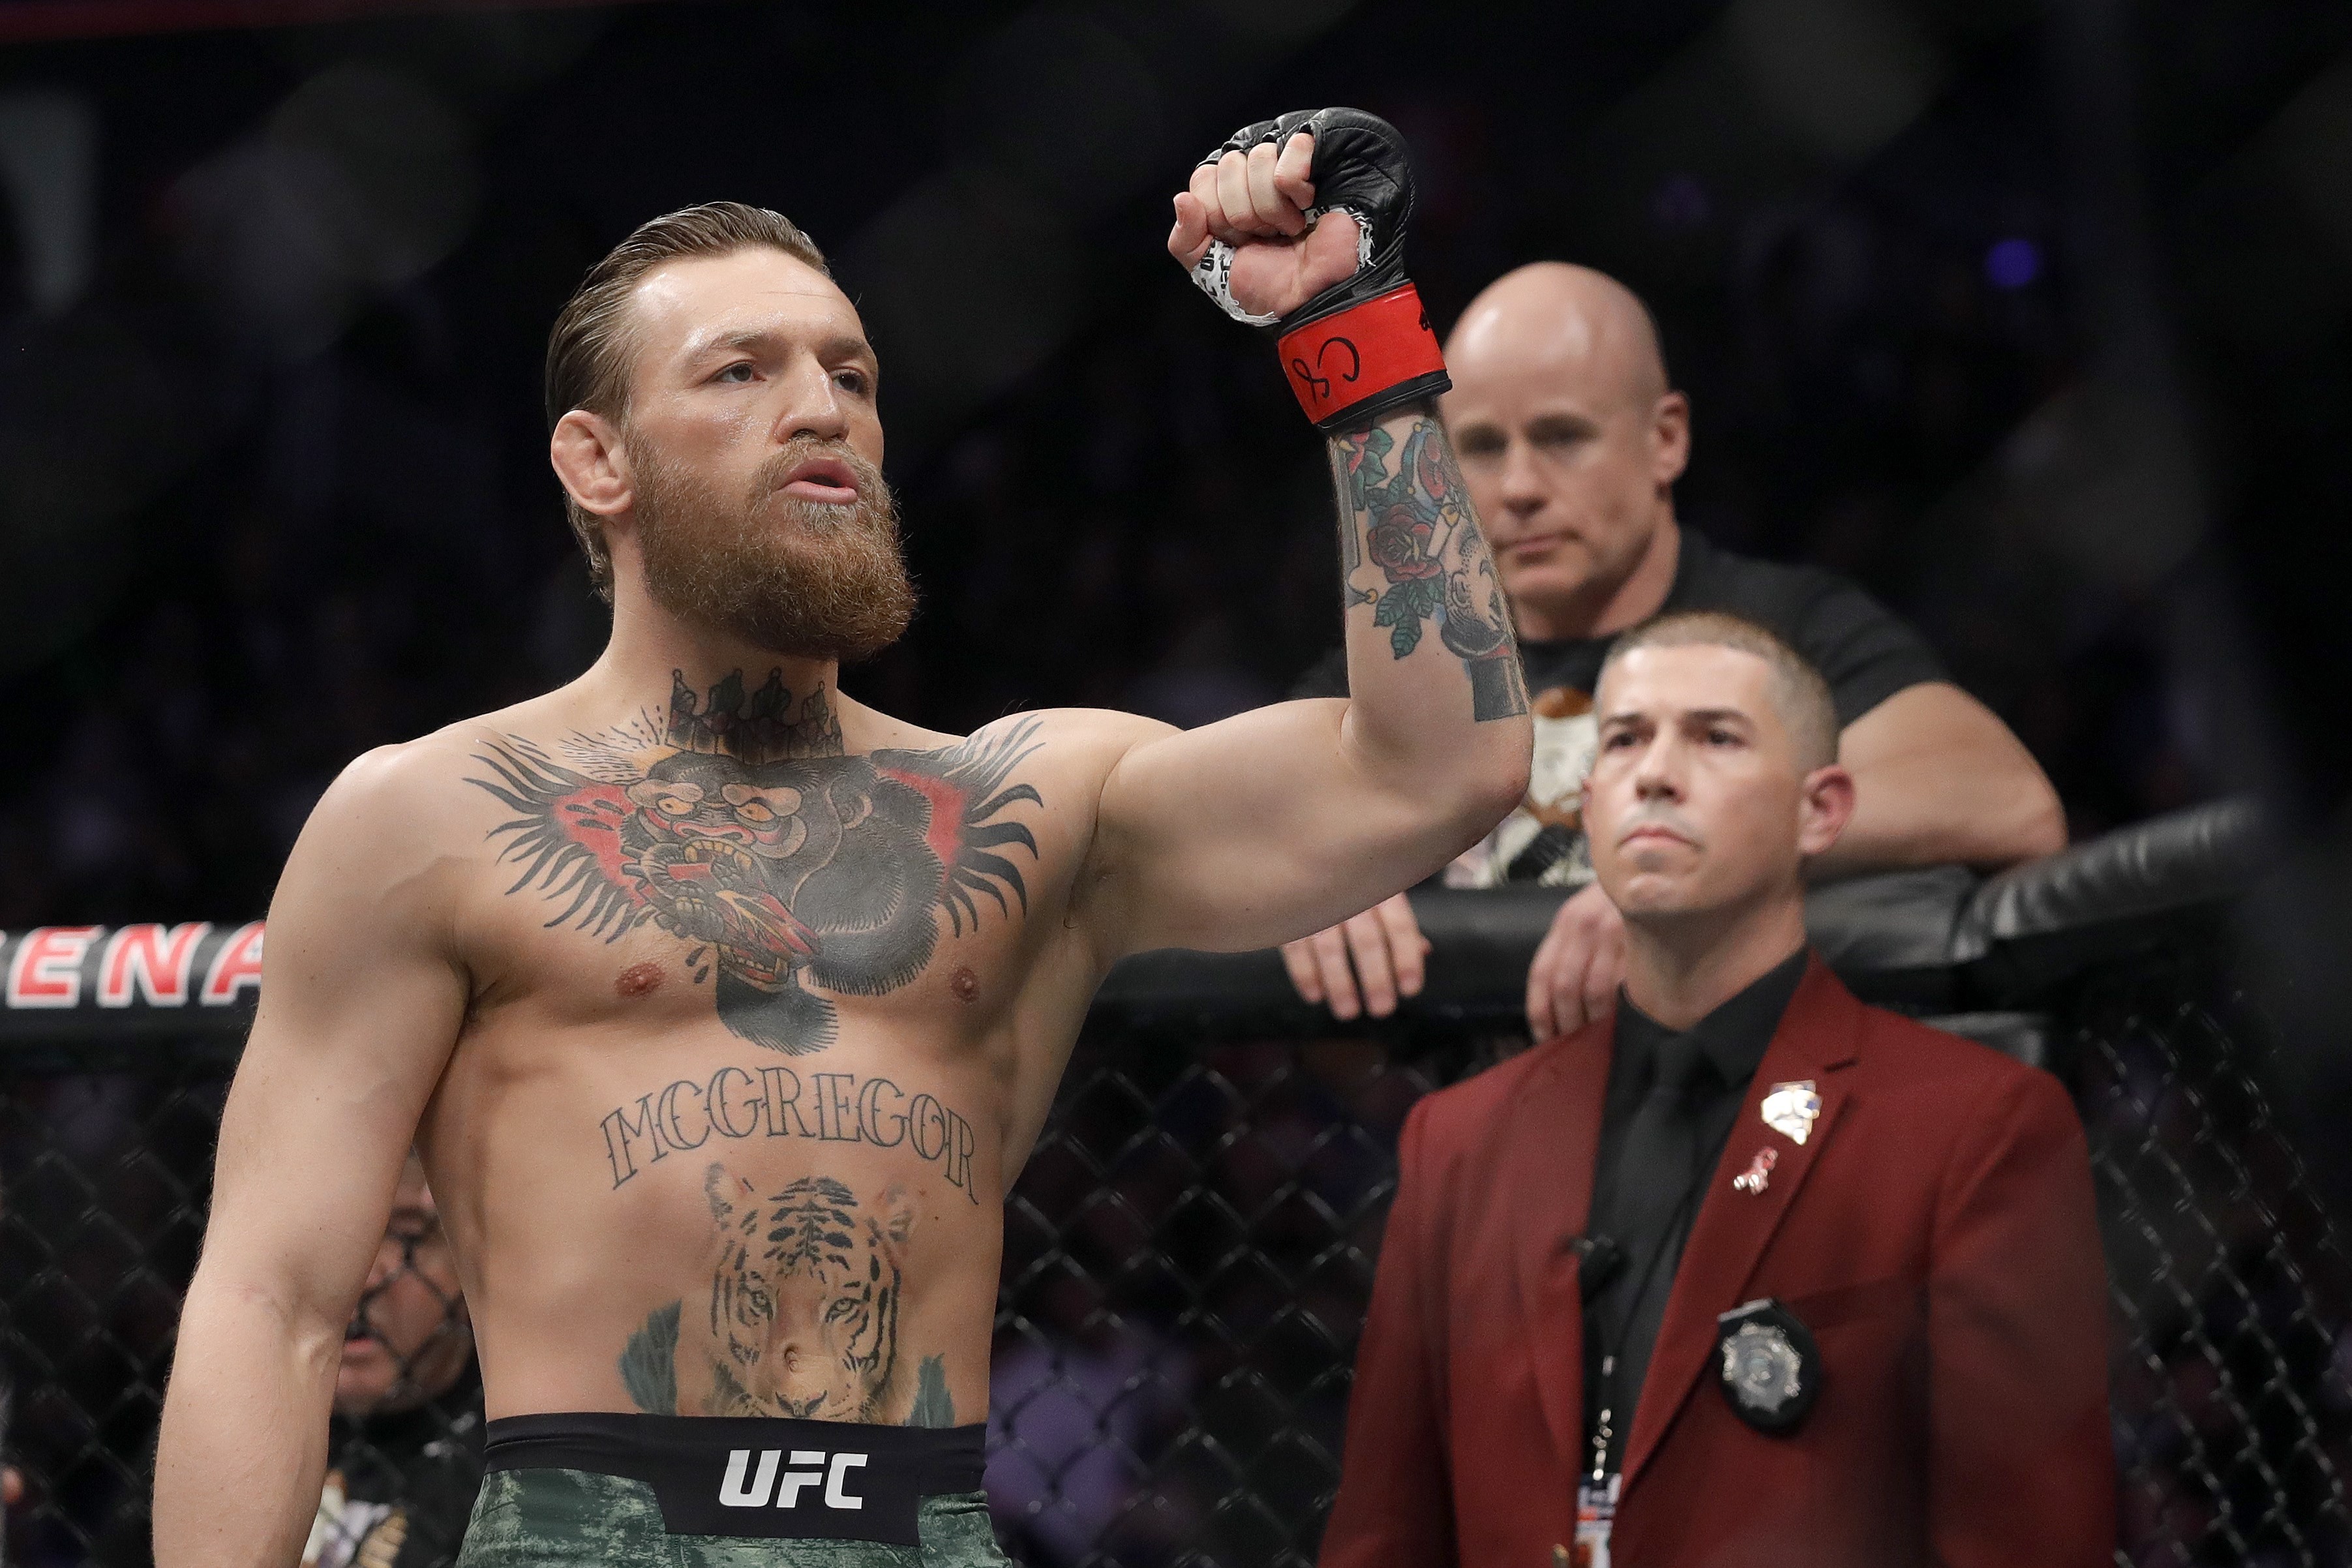 Conor McGregor reacts before taking on Donald Cerrone in their welterweight bout during UFC 246. Photo: AFP